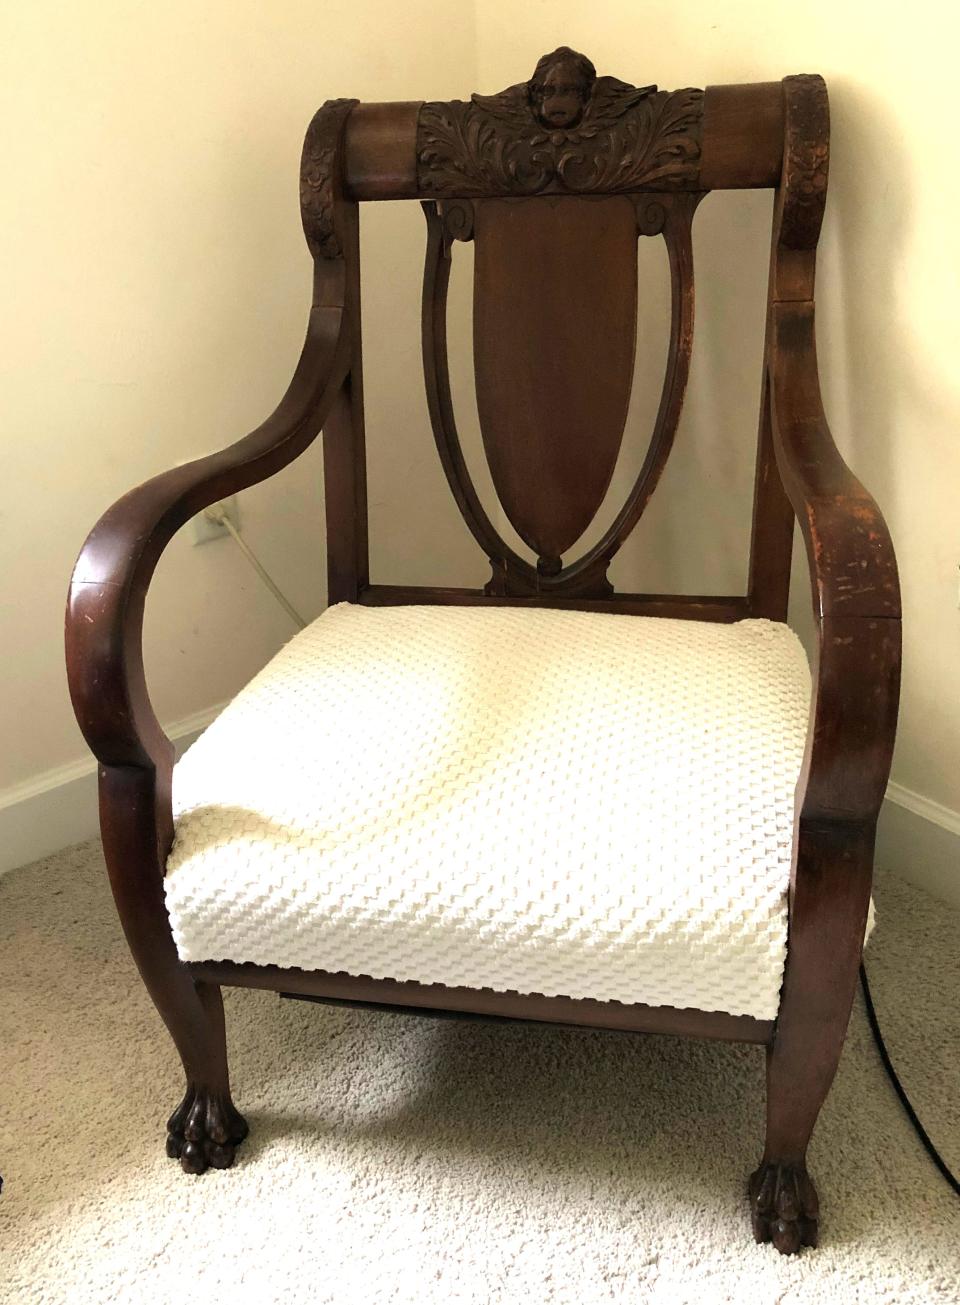 This chair was made in America, possibly in Grand Rapids, Michigan. The style is Empire Revival. The white upholstery is not appropriate for the chair.